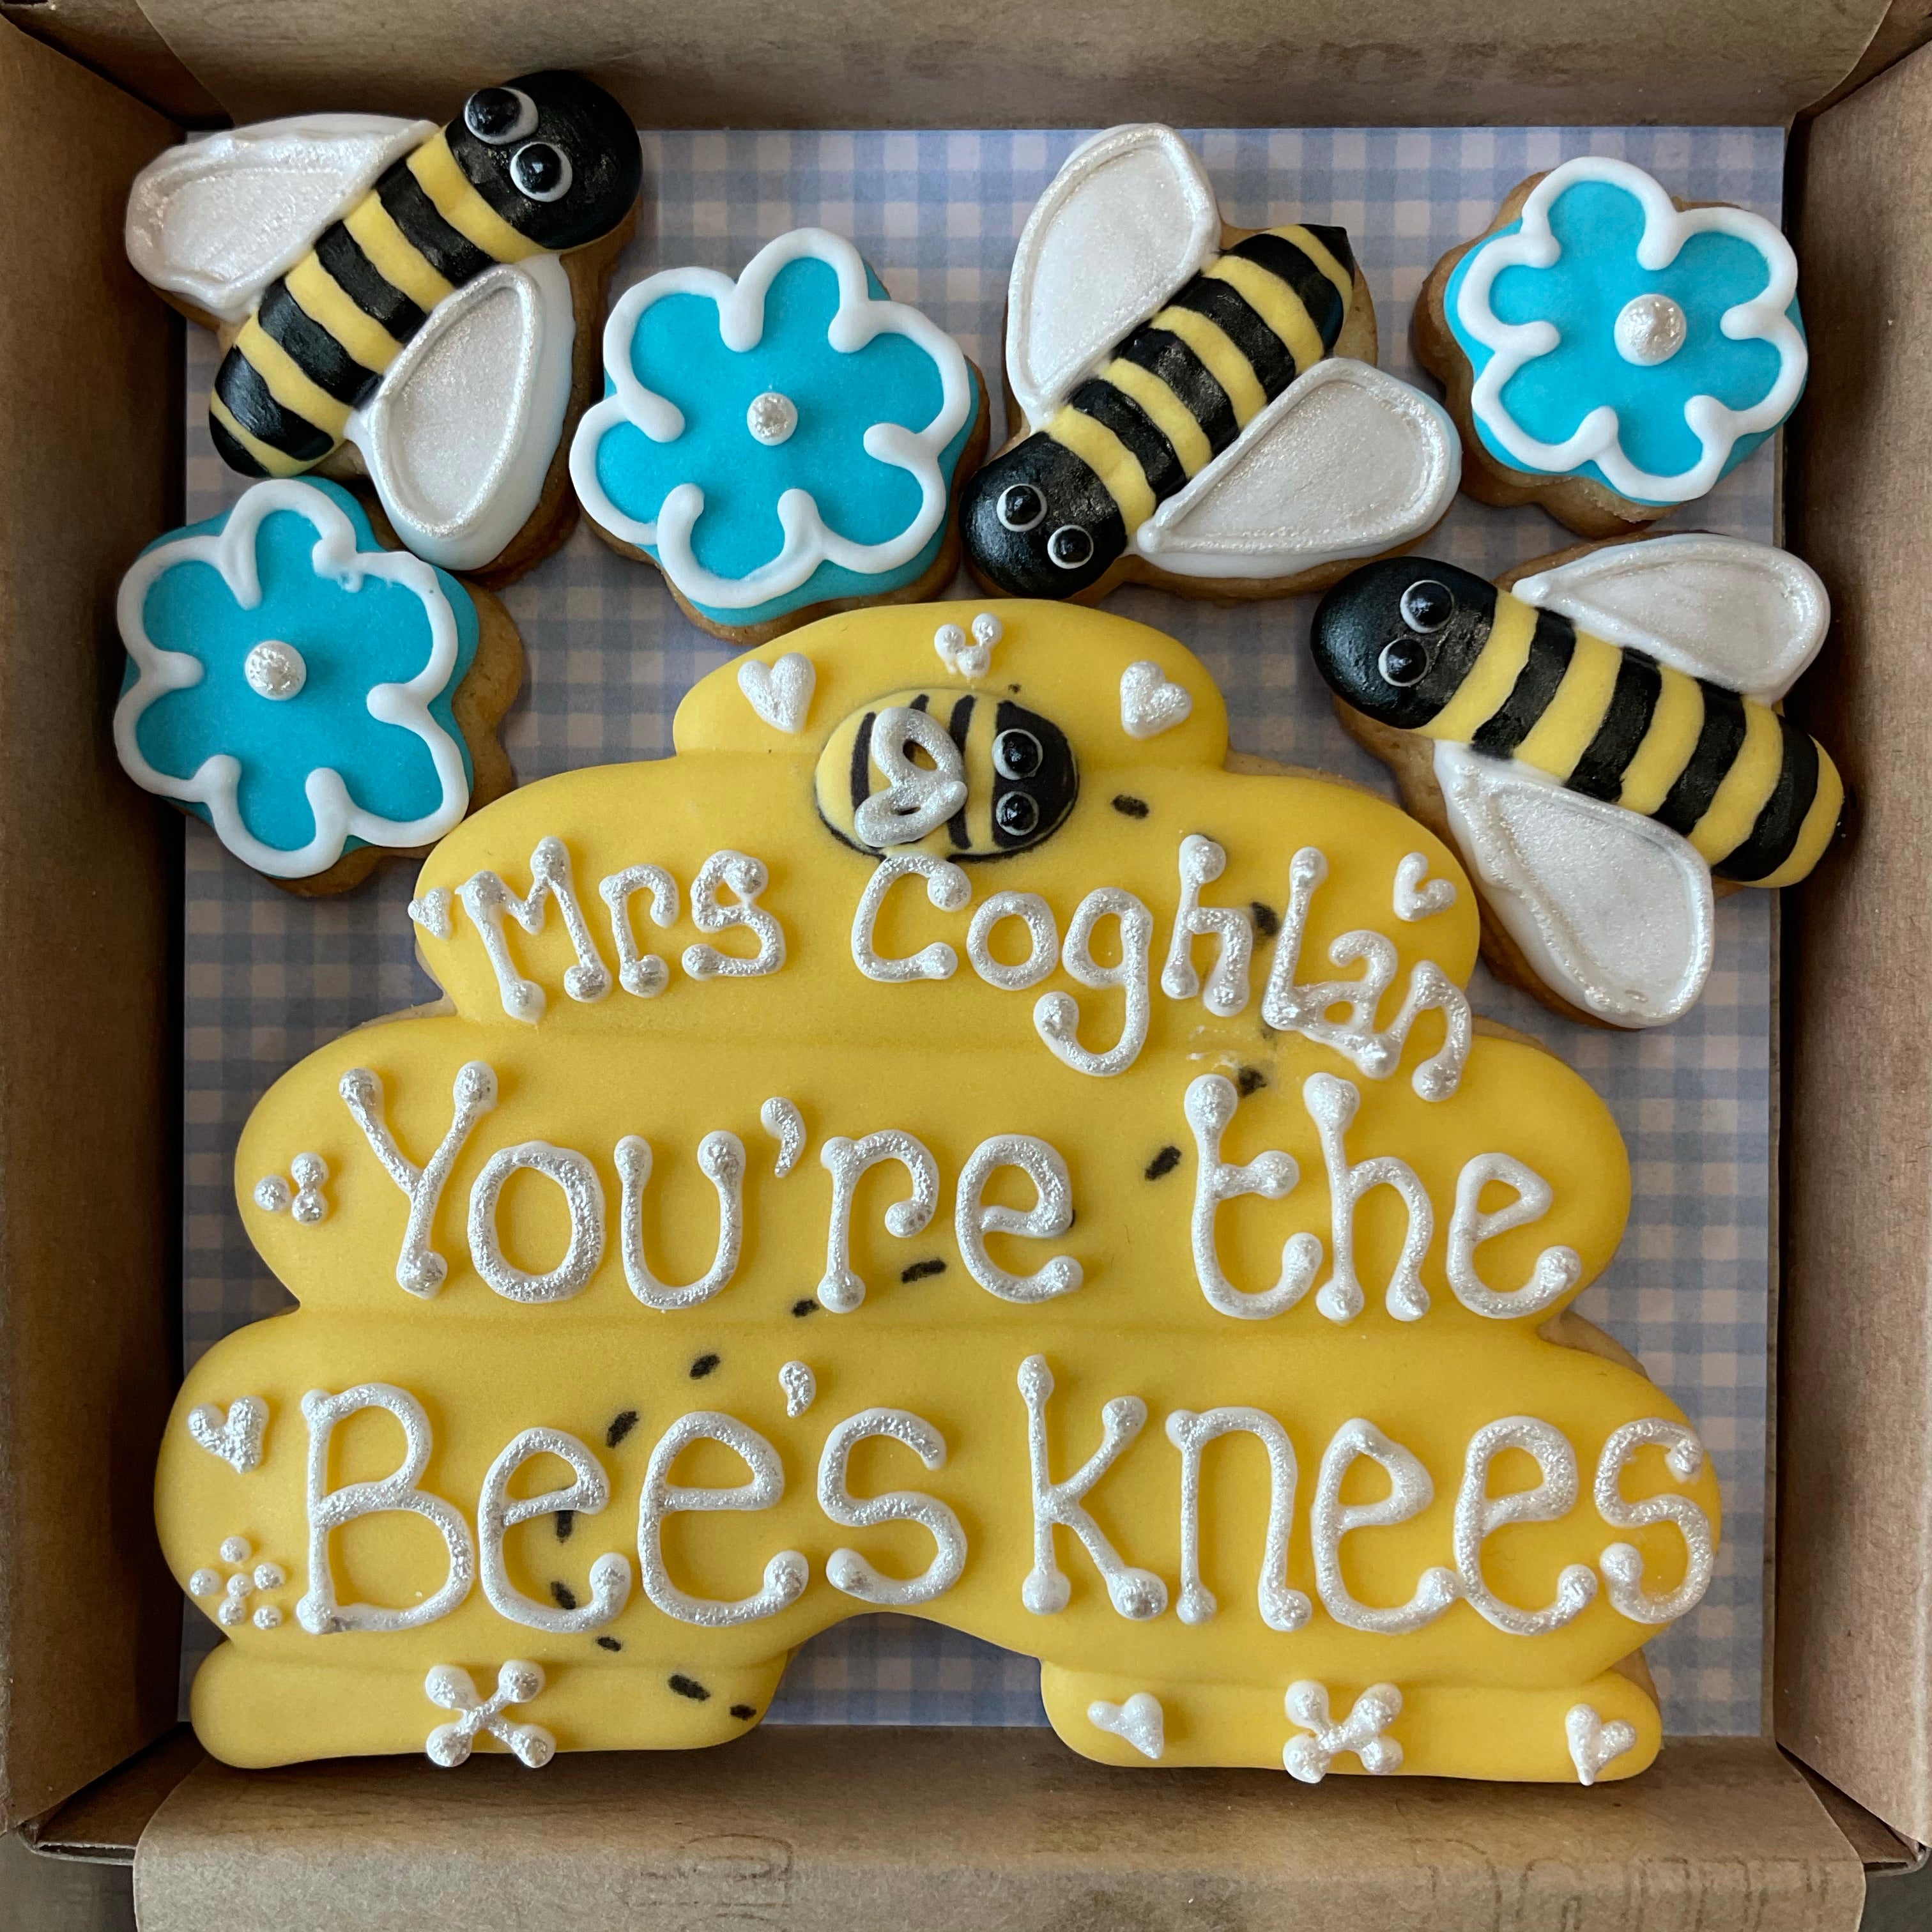 Bee Hive, Bees and Flowers small cookie box